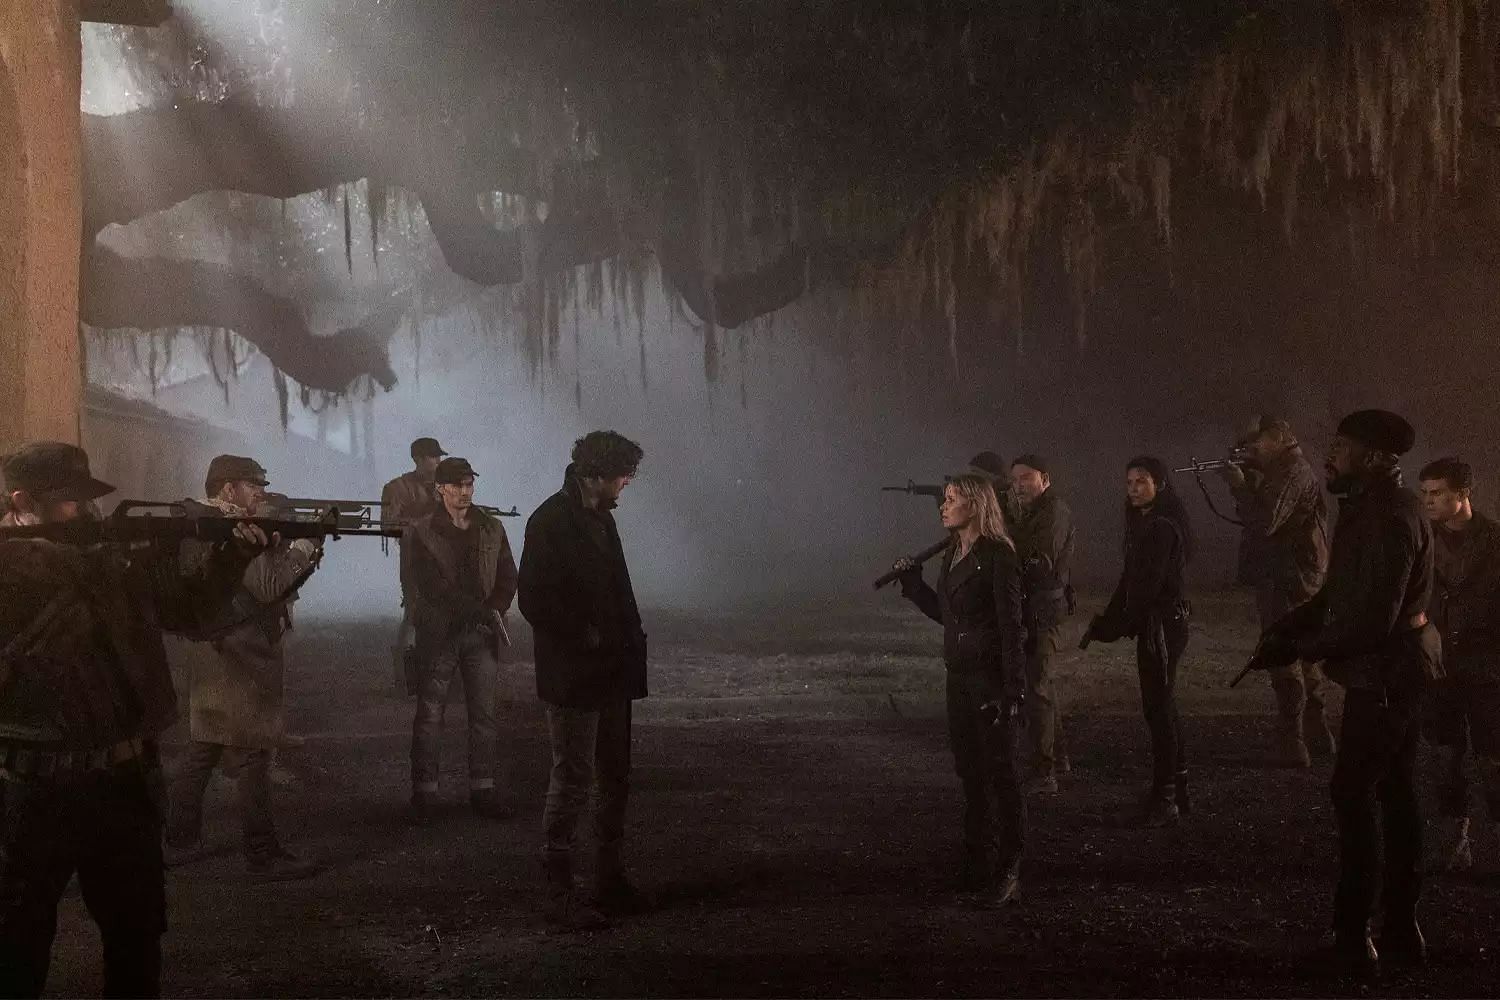 Fear The Walking Dead season 8 episode 8 has one of the most shocking deaths in the series (Image via AMC)